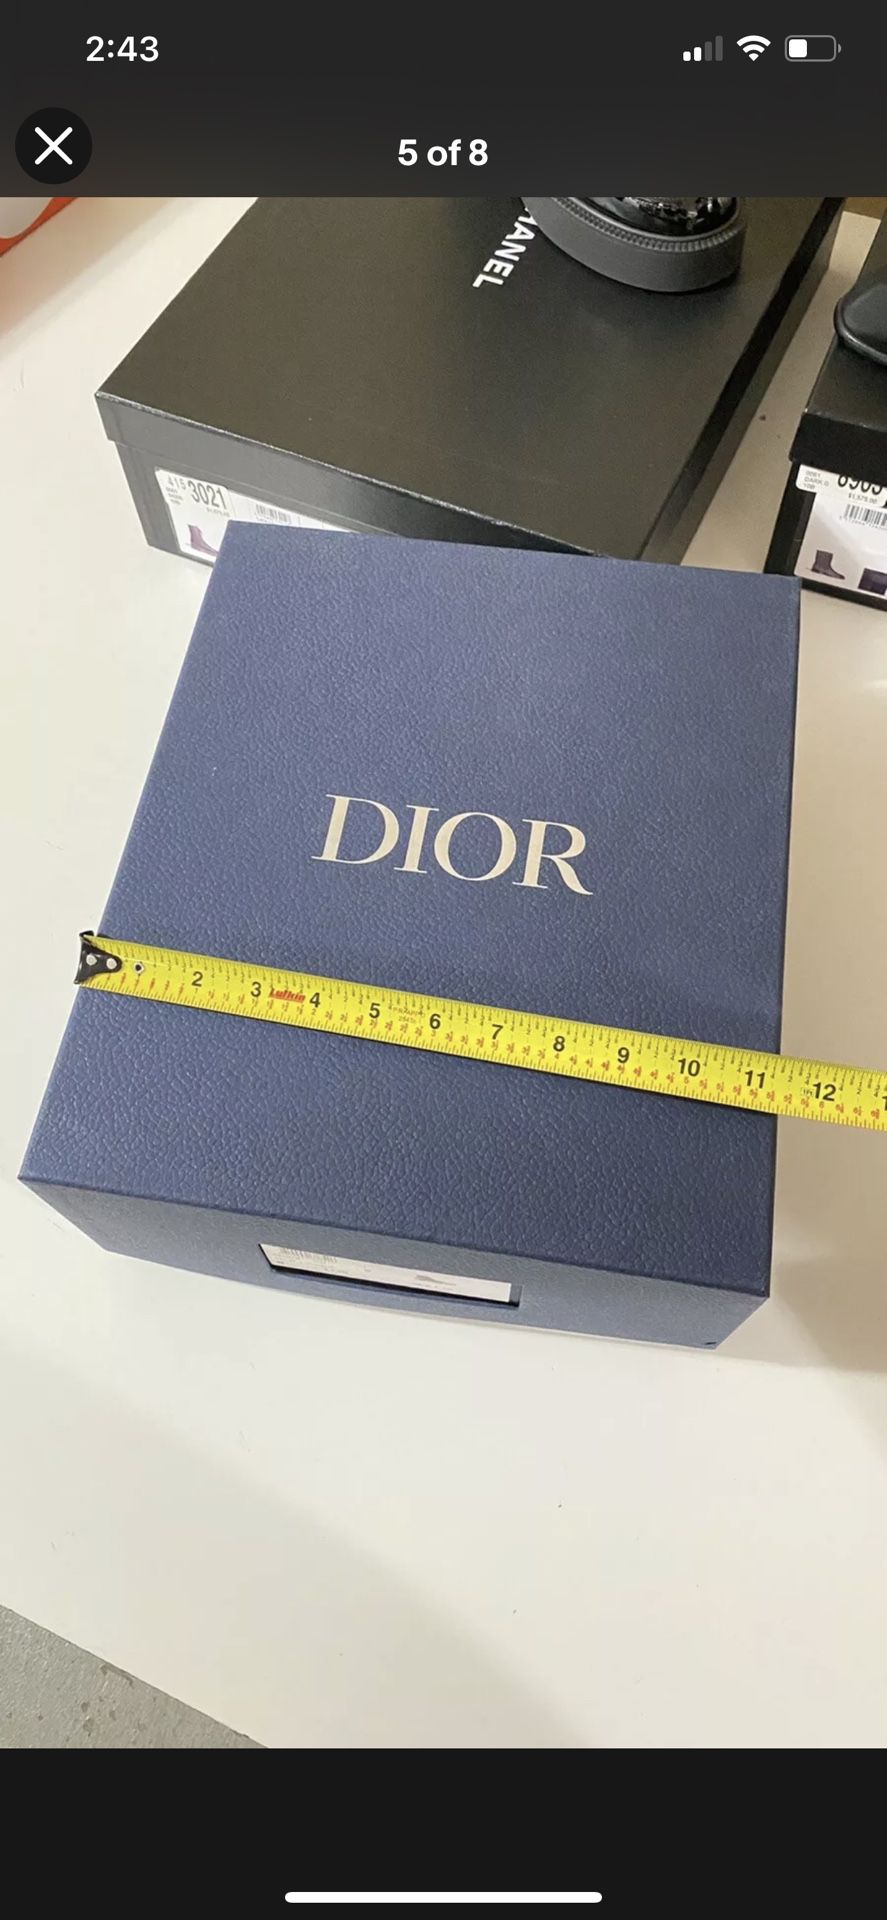 Dior Limited Shoe Gift Storege Box W/Tissue Invoice Card Thank You Letter